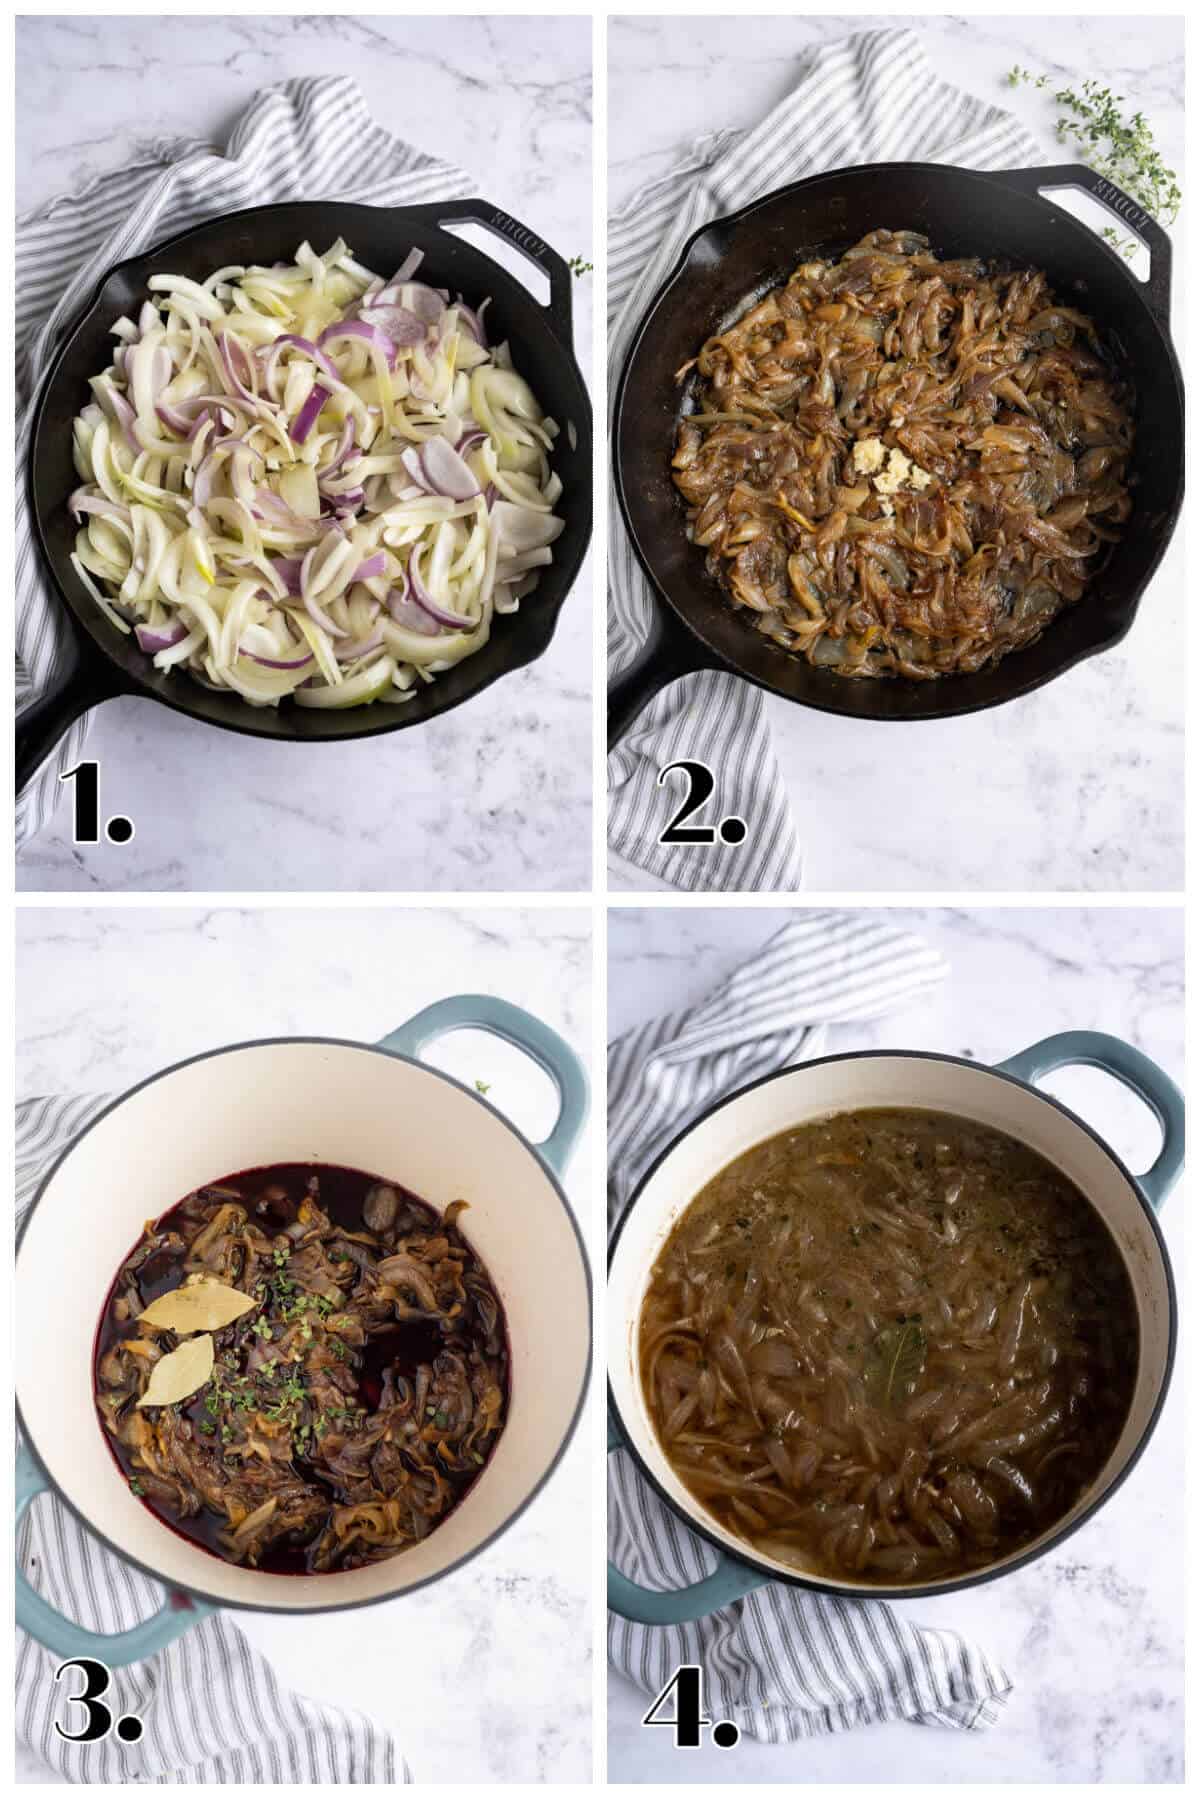 4 image collage showing the first 4 steps to make French onion soup at home.